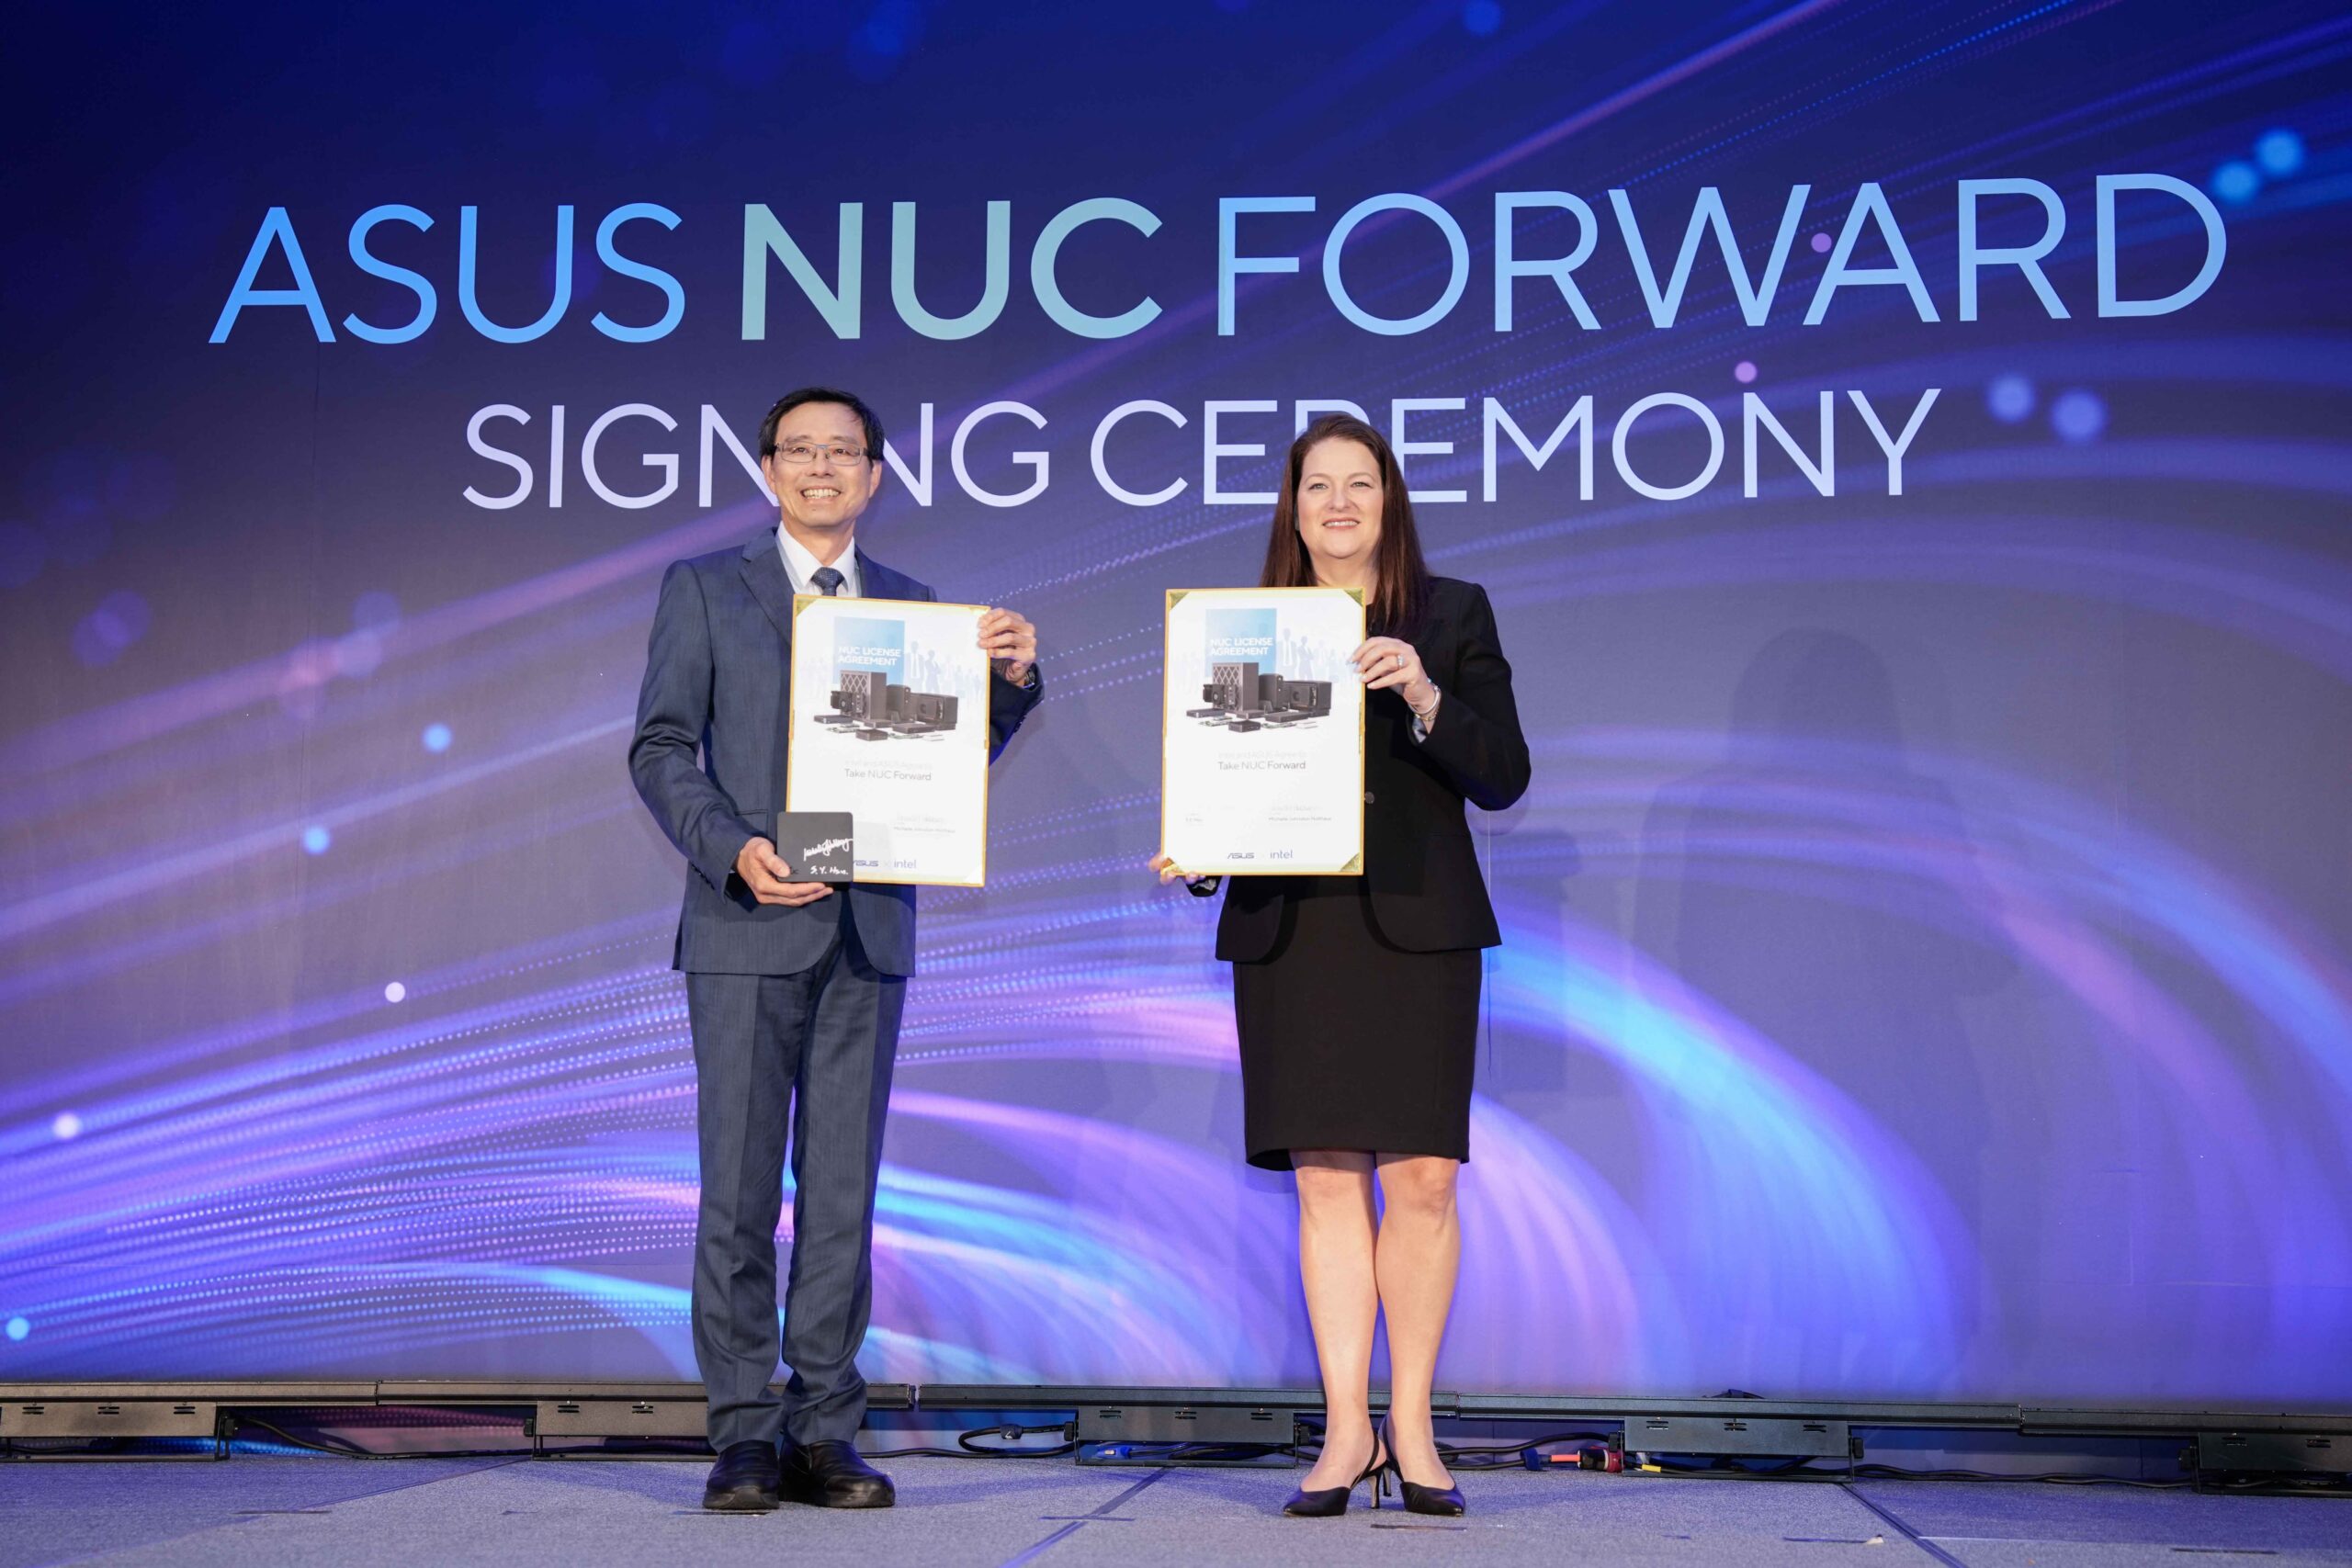 4. ASUS continuously endeavors to build long term business relationships by connecting and servicing its customers with the principle of co winning in mind. scaled